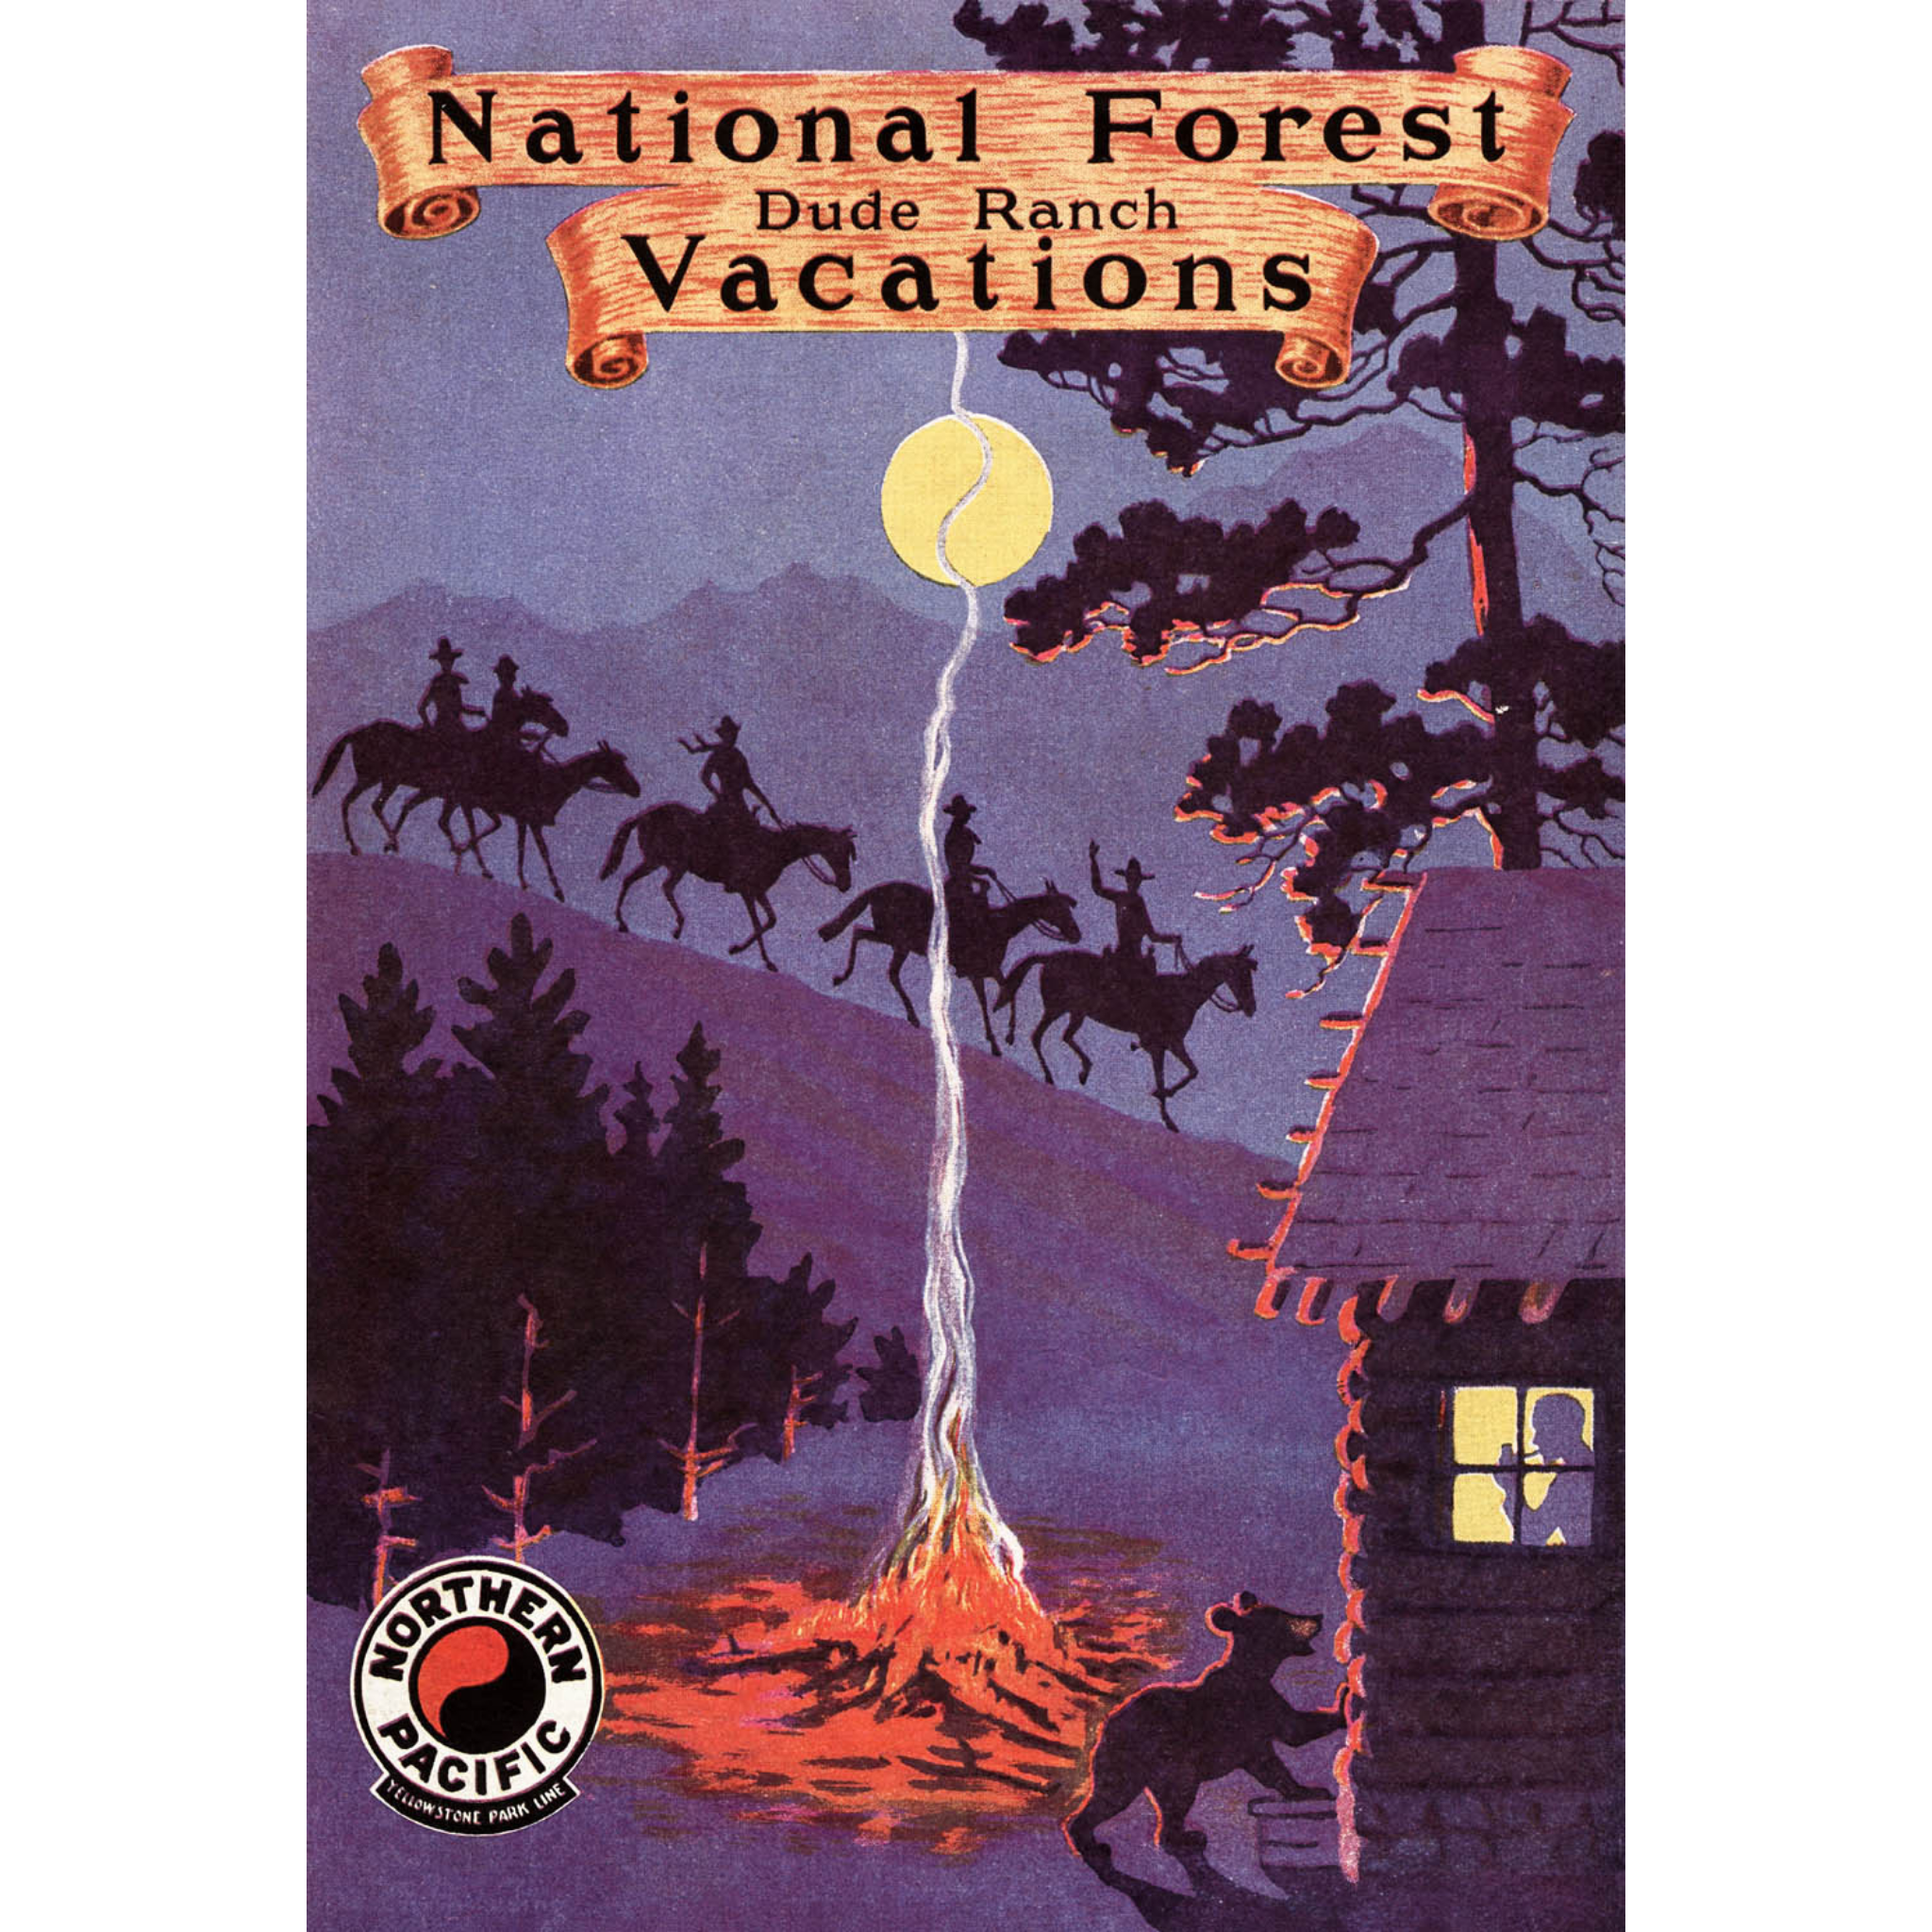 National Forest - Dude Ranch Vacations (NPRR) - ca. 1930 Lithograph